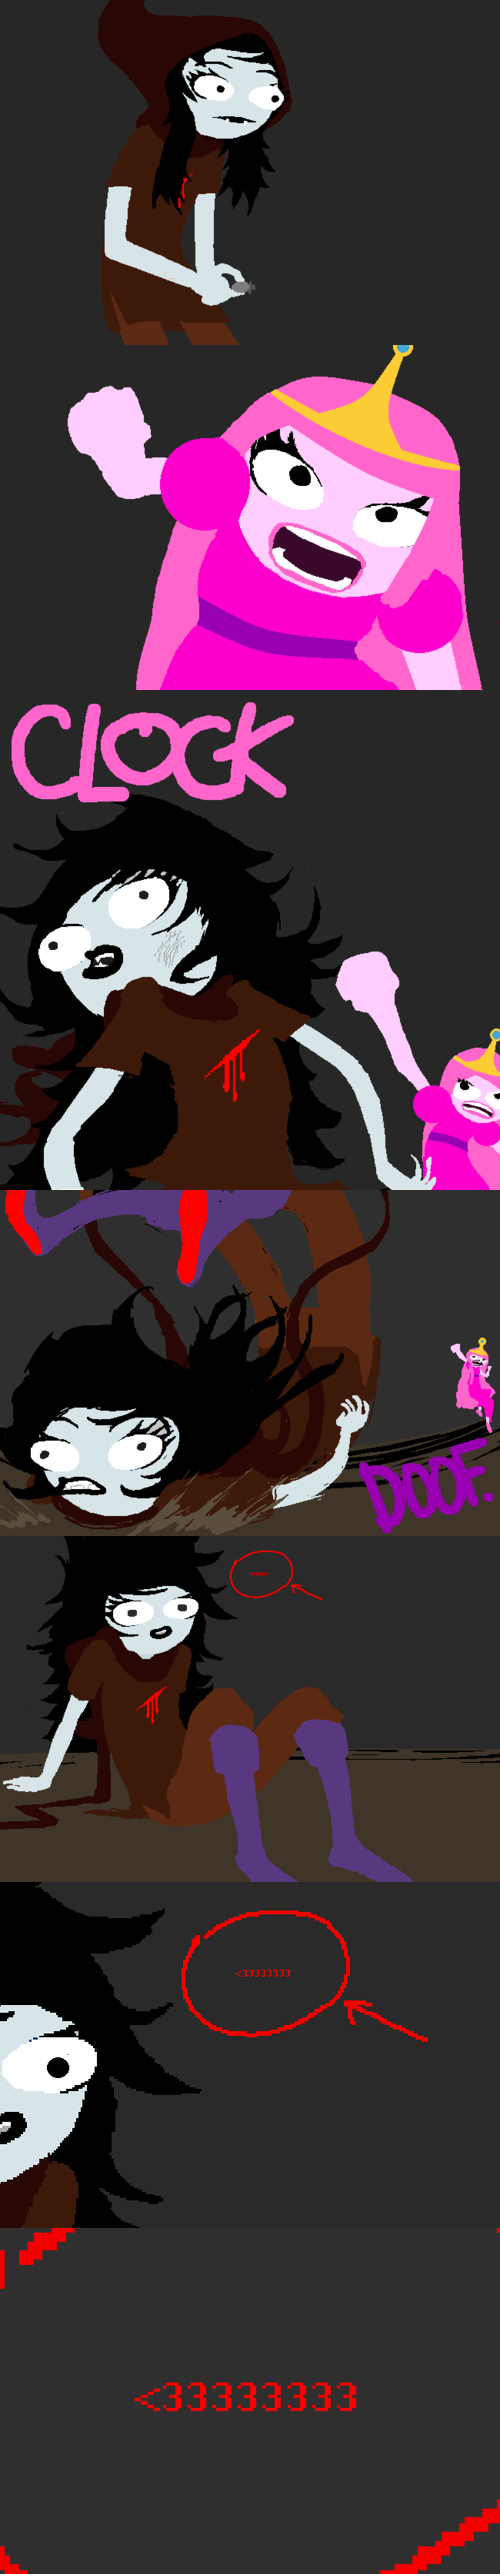 adventure_time arisenanew blood_aspect comic crossover godtier heart image_manipulation redrom shipping strife text thief